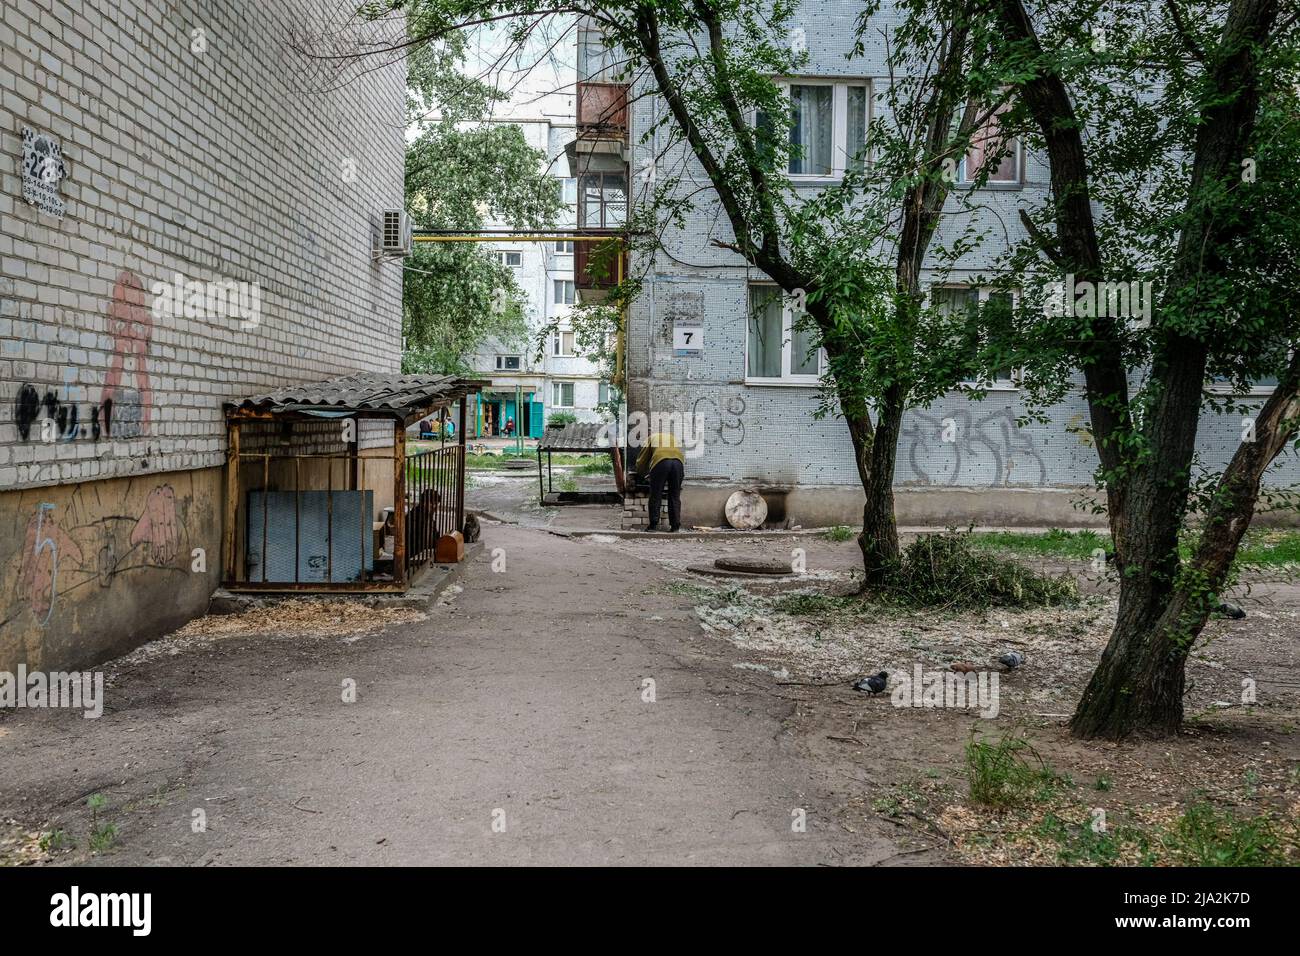 Severodonetsk, Ukraine. 25th May, 2022. People living in a bunker seen cooking food outside. Severodonetsk, the largest city under Ukrainian control in Luhansk province, has come under intense artillery and missile strikes from Russian army. The city is almost completely isolated from the rest of the region. (Photo by Rick Mave/SOPA Images/Sipa USA) Credit: Sipa USA/Alamy Live News Stock Photo